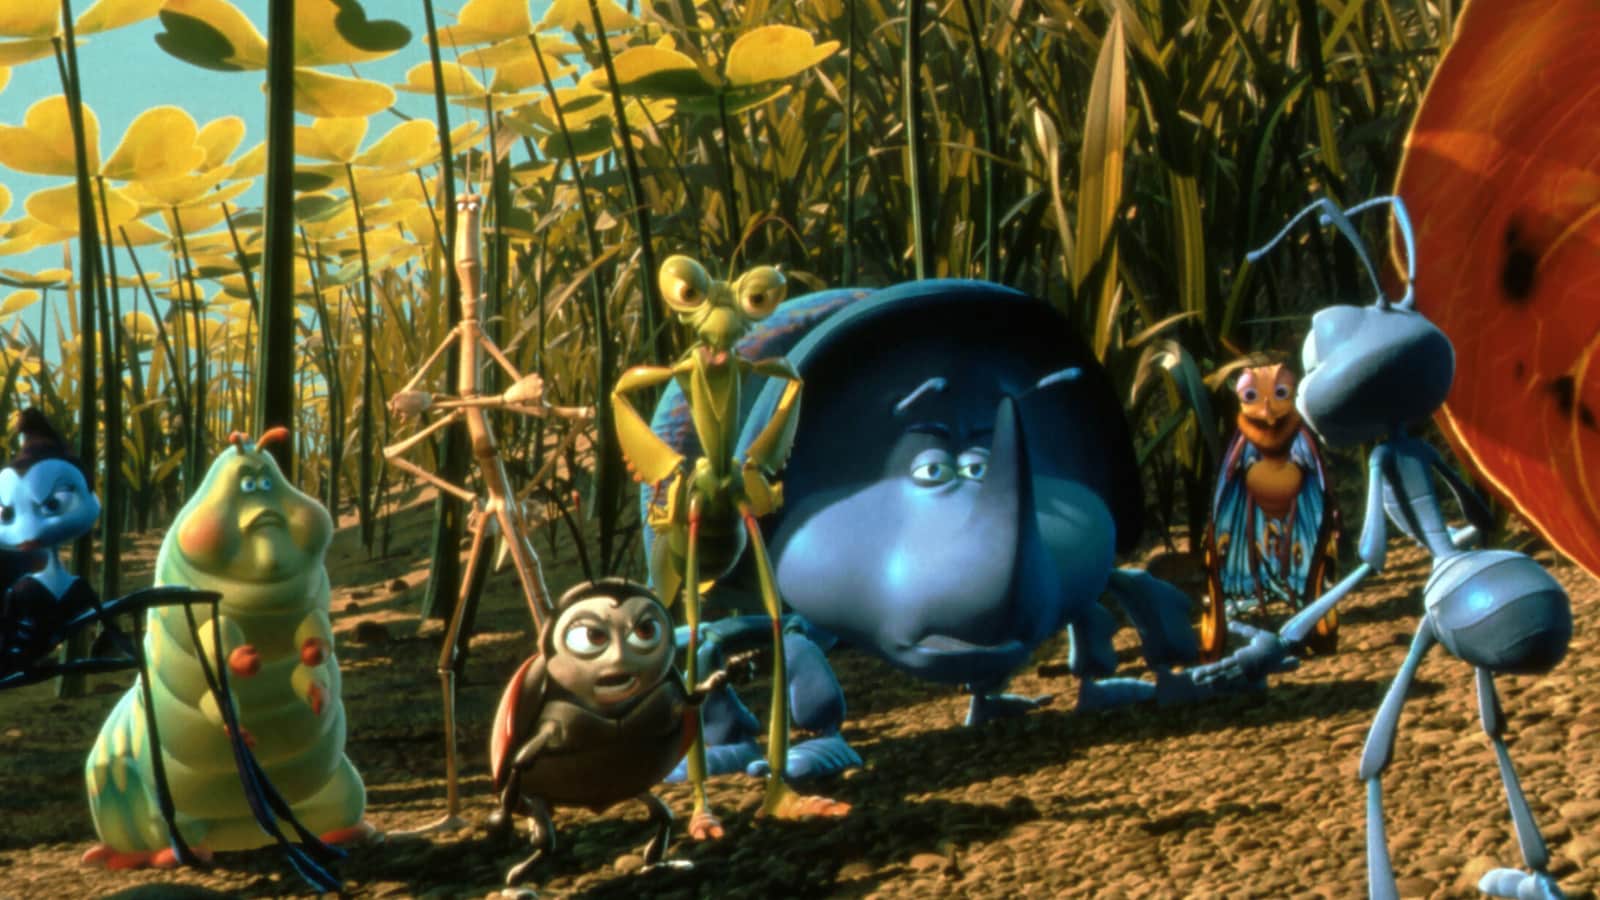 a-bugs-life-1998